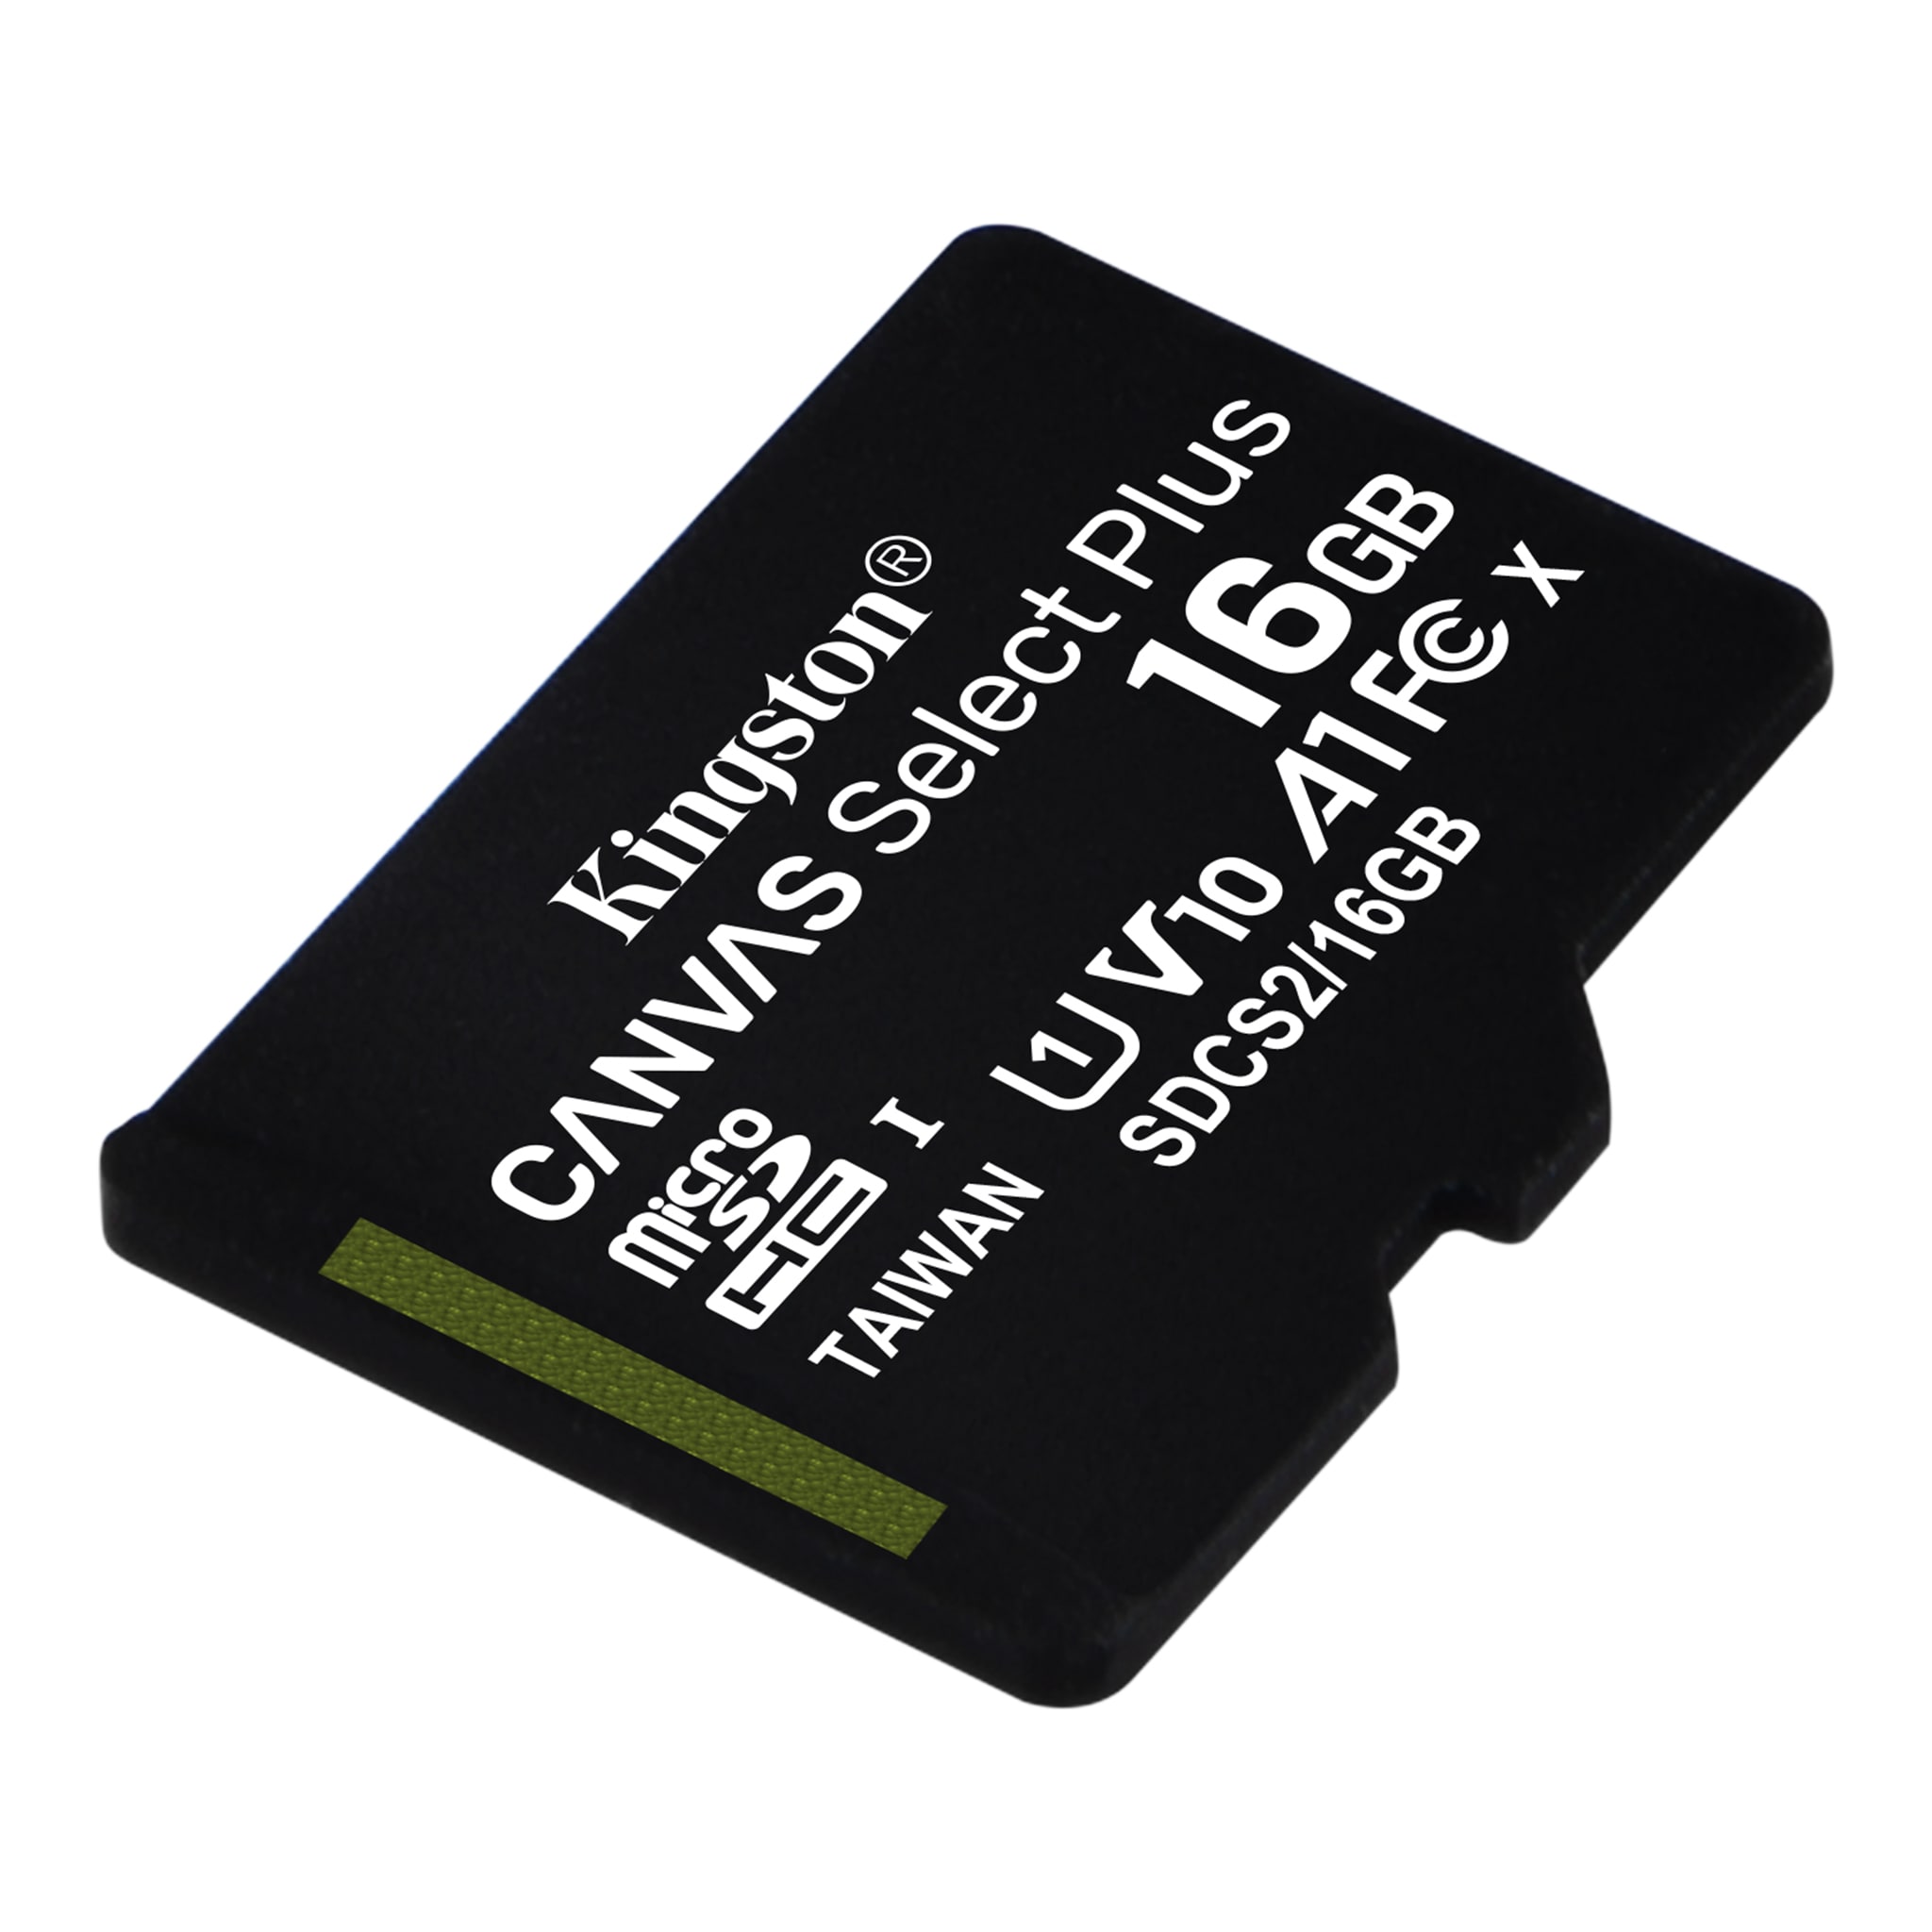 Kingston 128GB Samsung SM-T817V MicroSDXC Canvas Select Plus Card Verified by SanFlash. 100MBs Works with Kingston